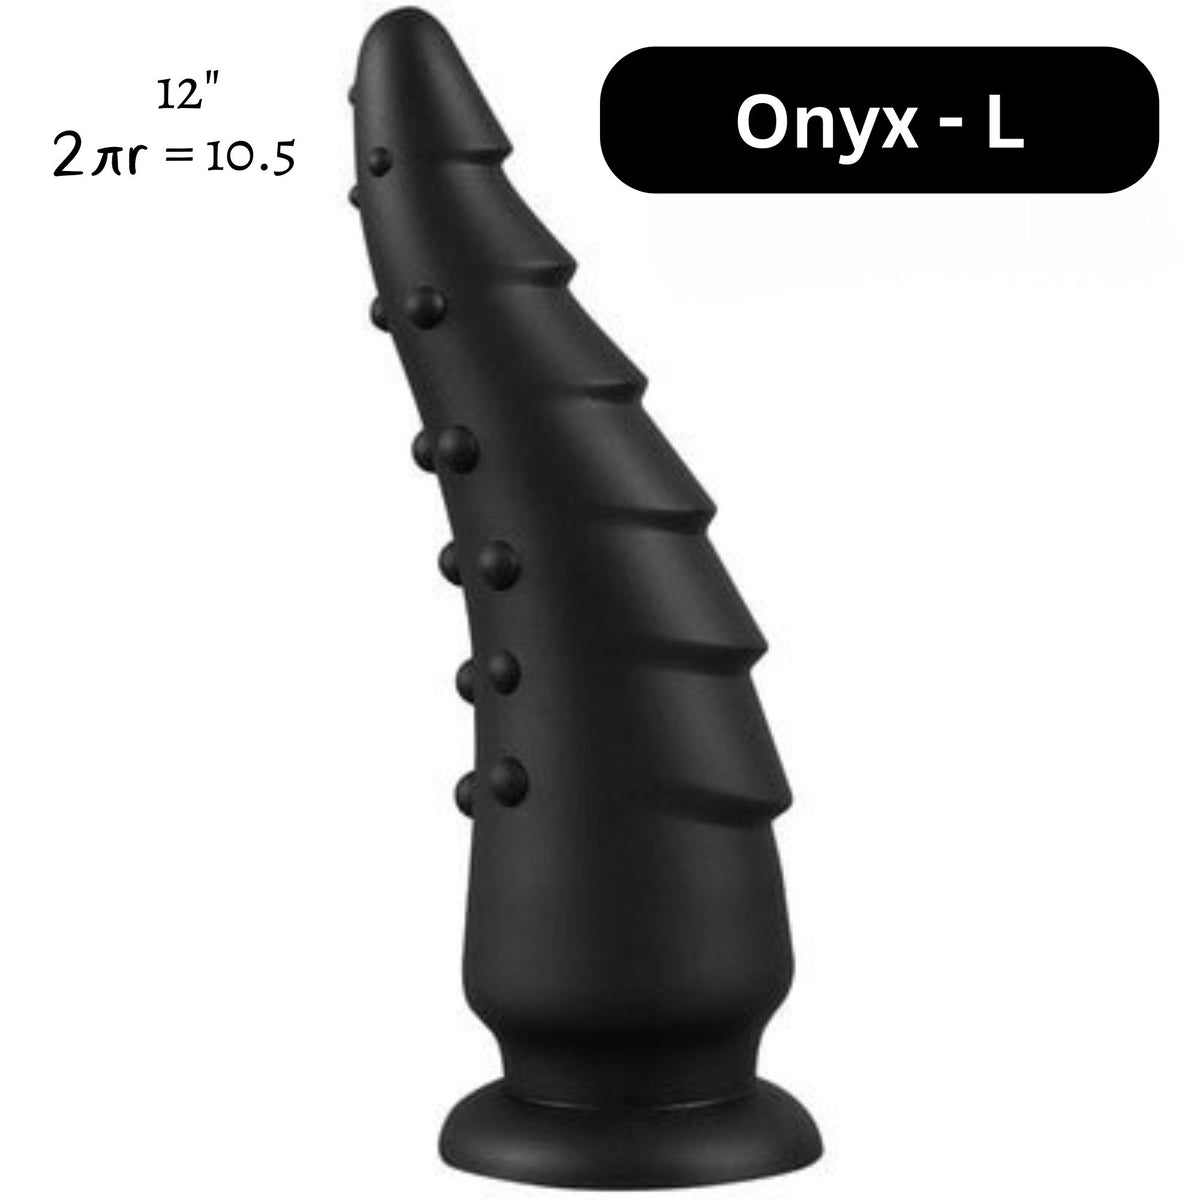 Octopussy Anal Toy - Anal Toy - Twisted Jezebel